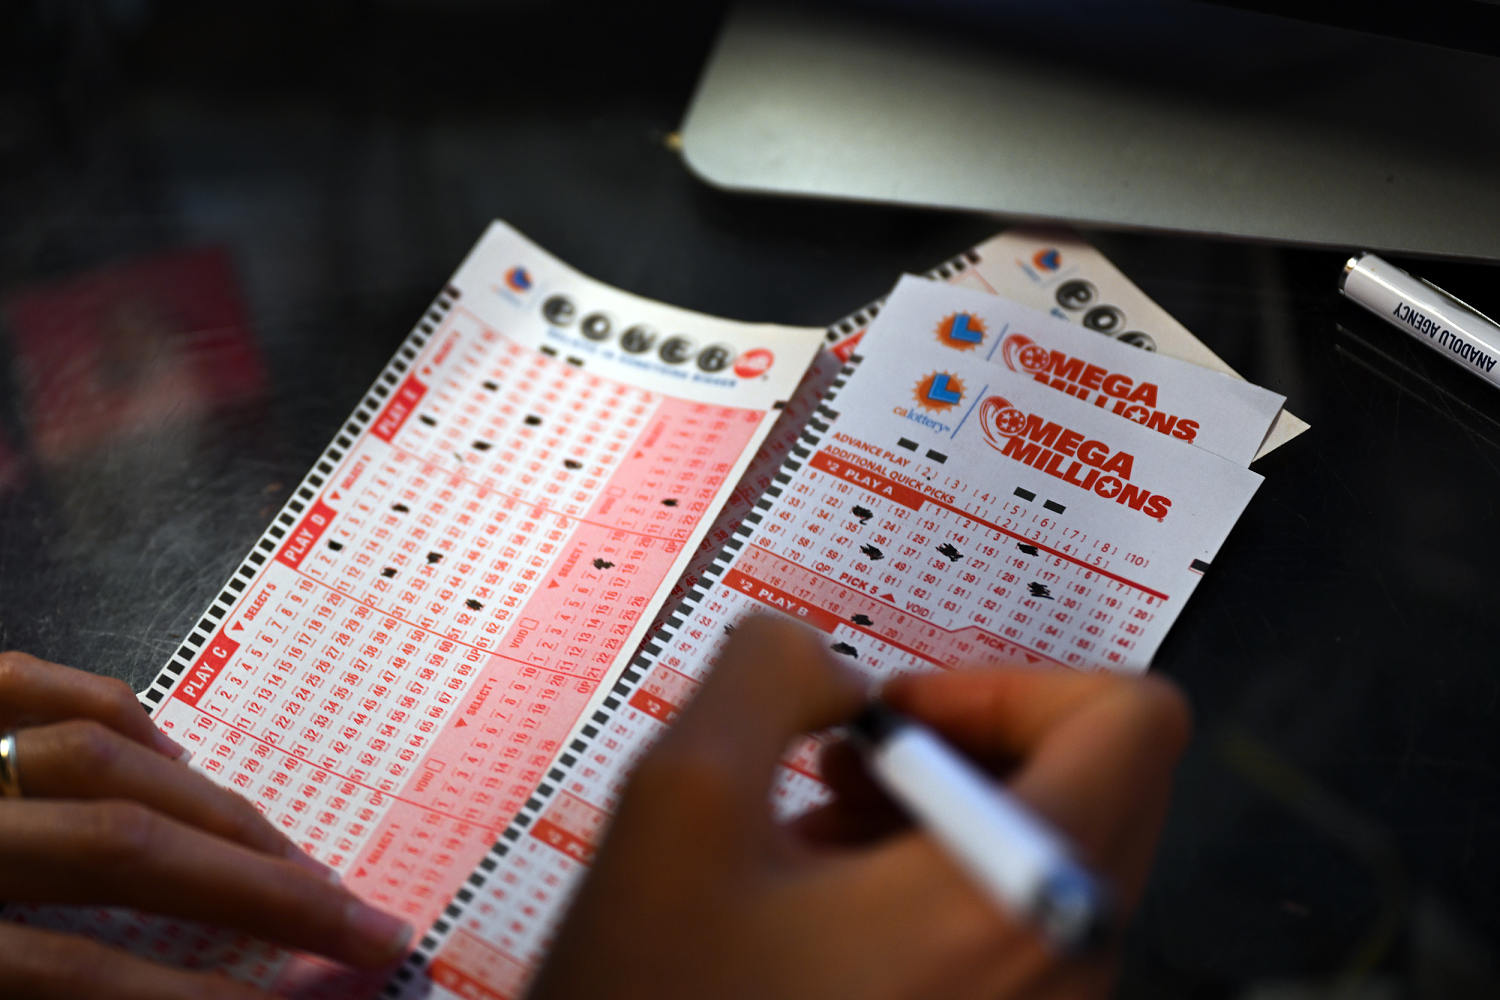 Powerball jackpot increases to $935 million after no one wins the top prize